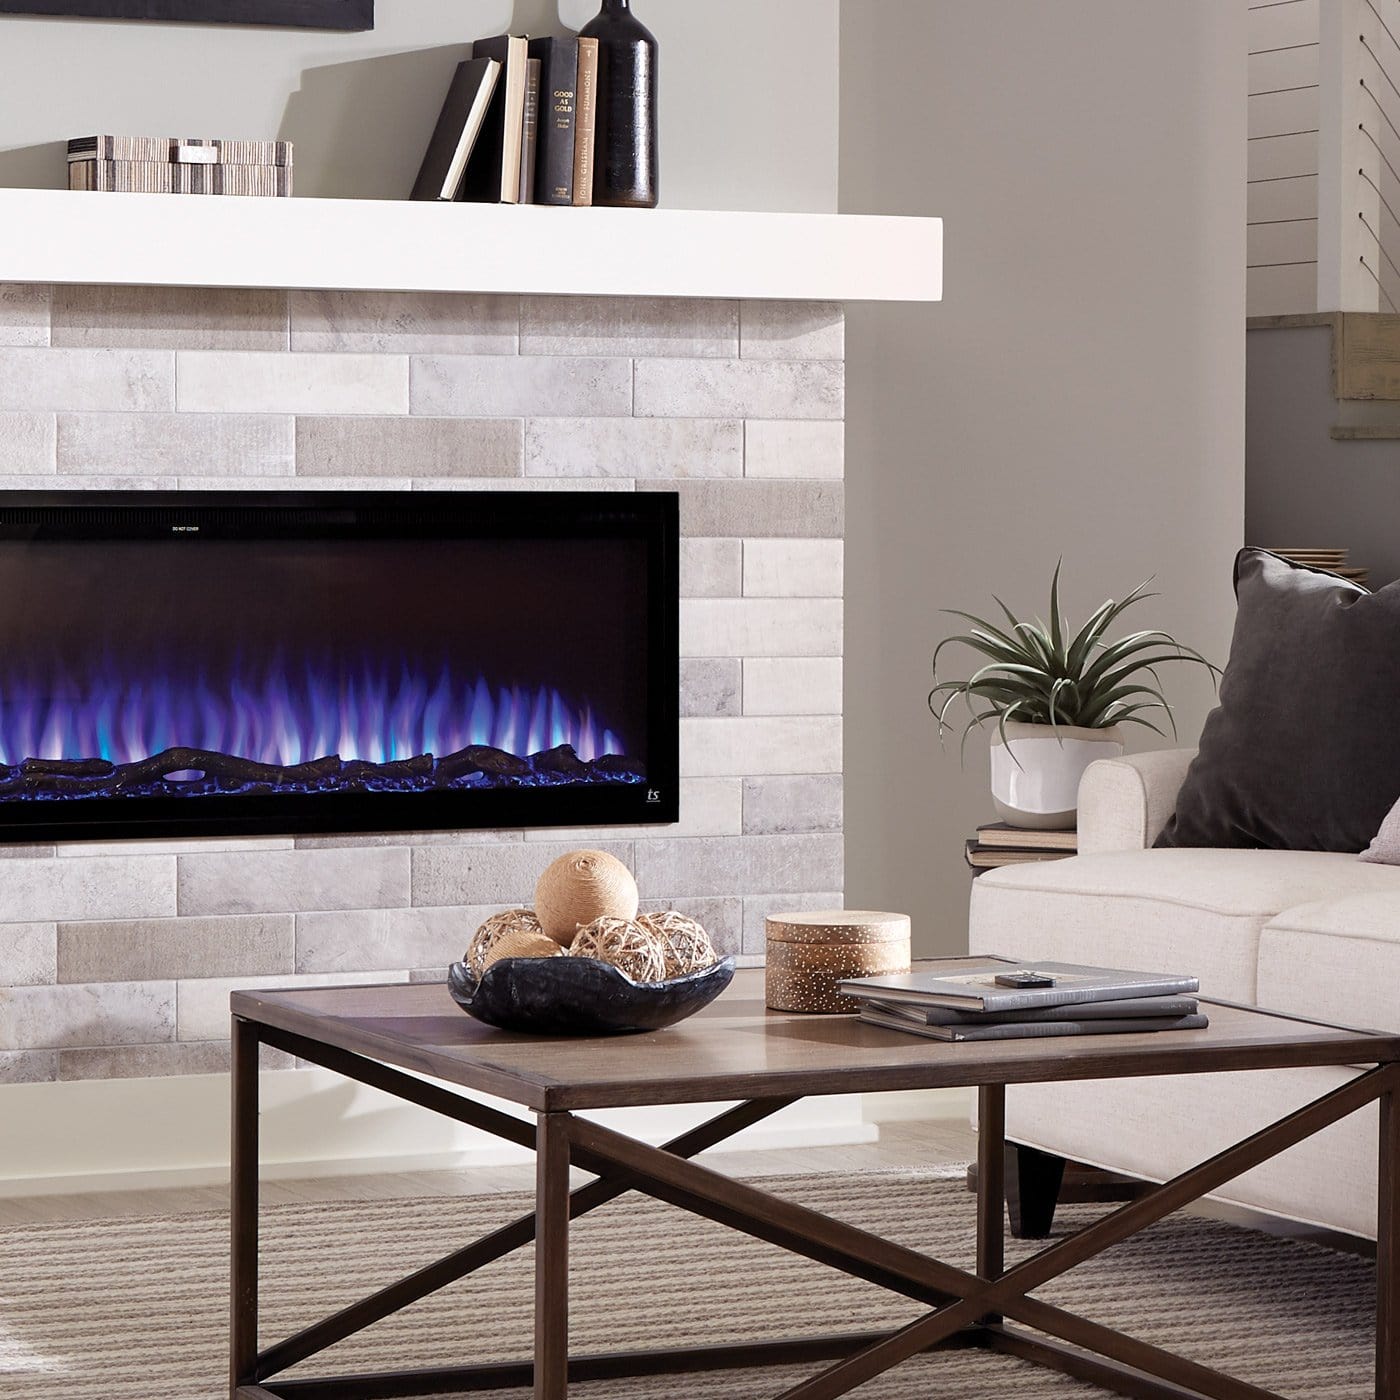 Touchstone Sideline Elite in a white brick fireplace mantel with blue flames and logs